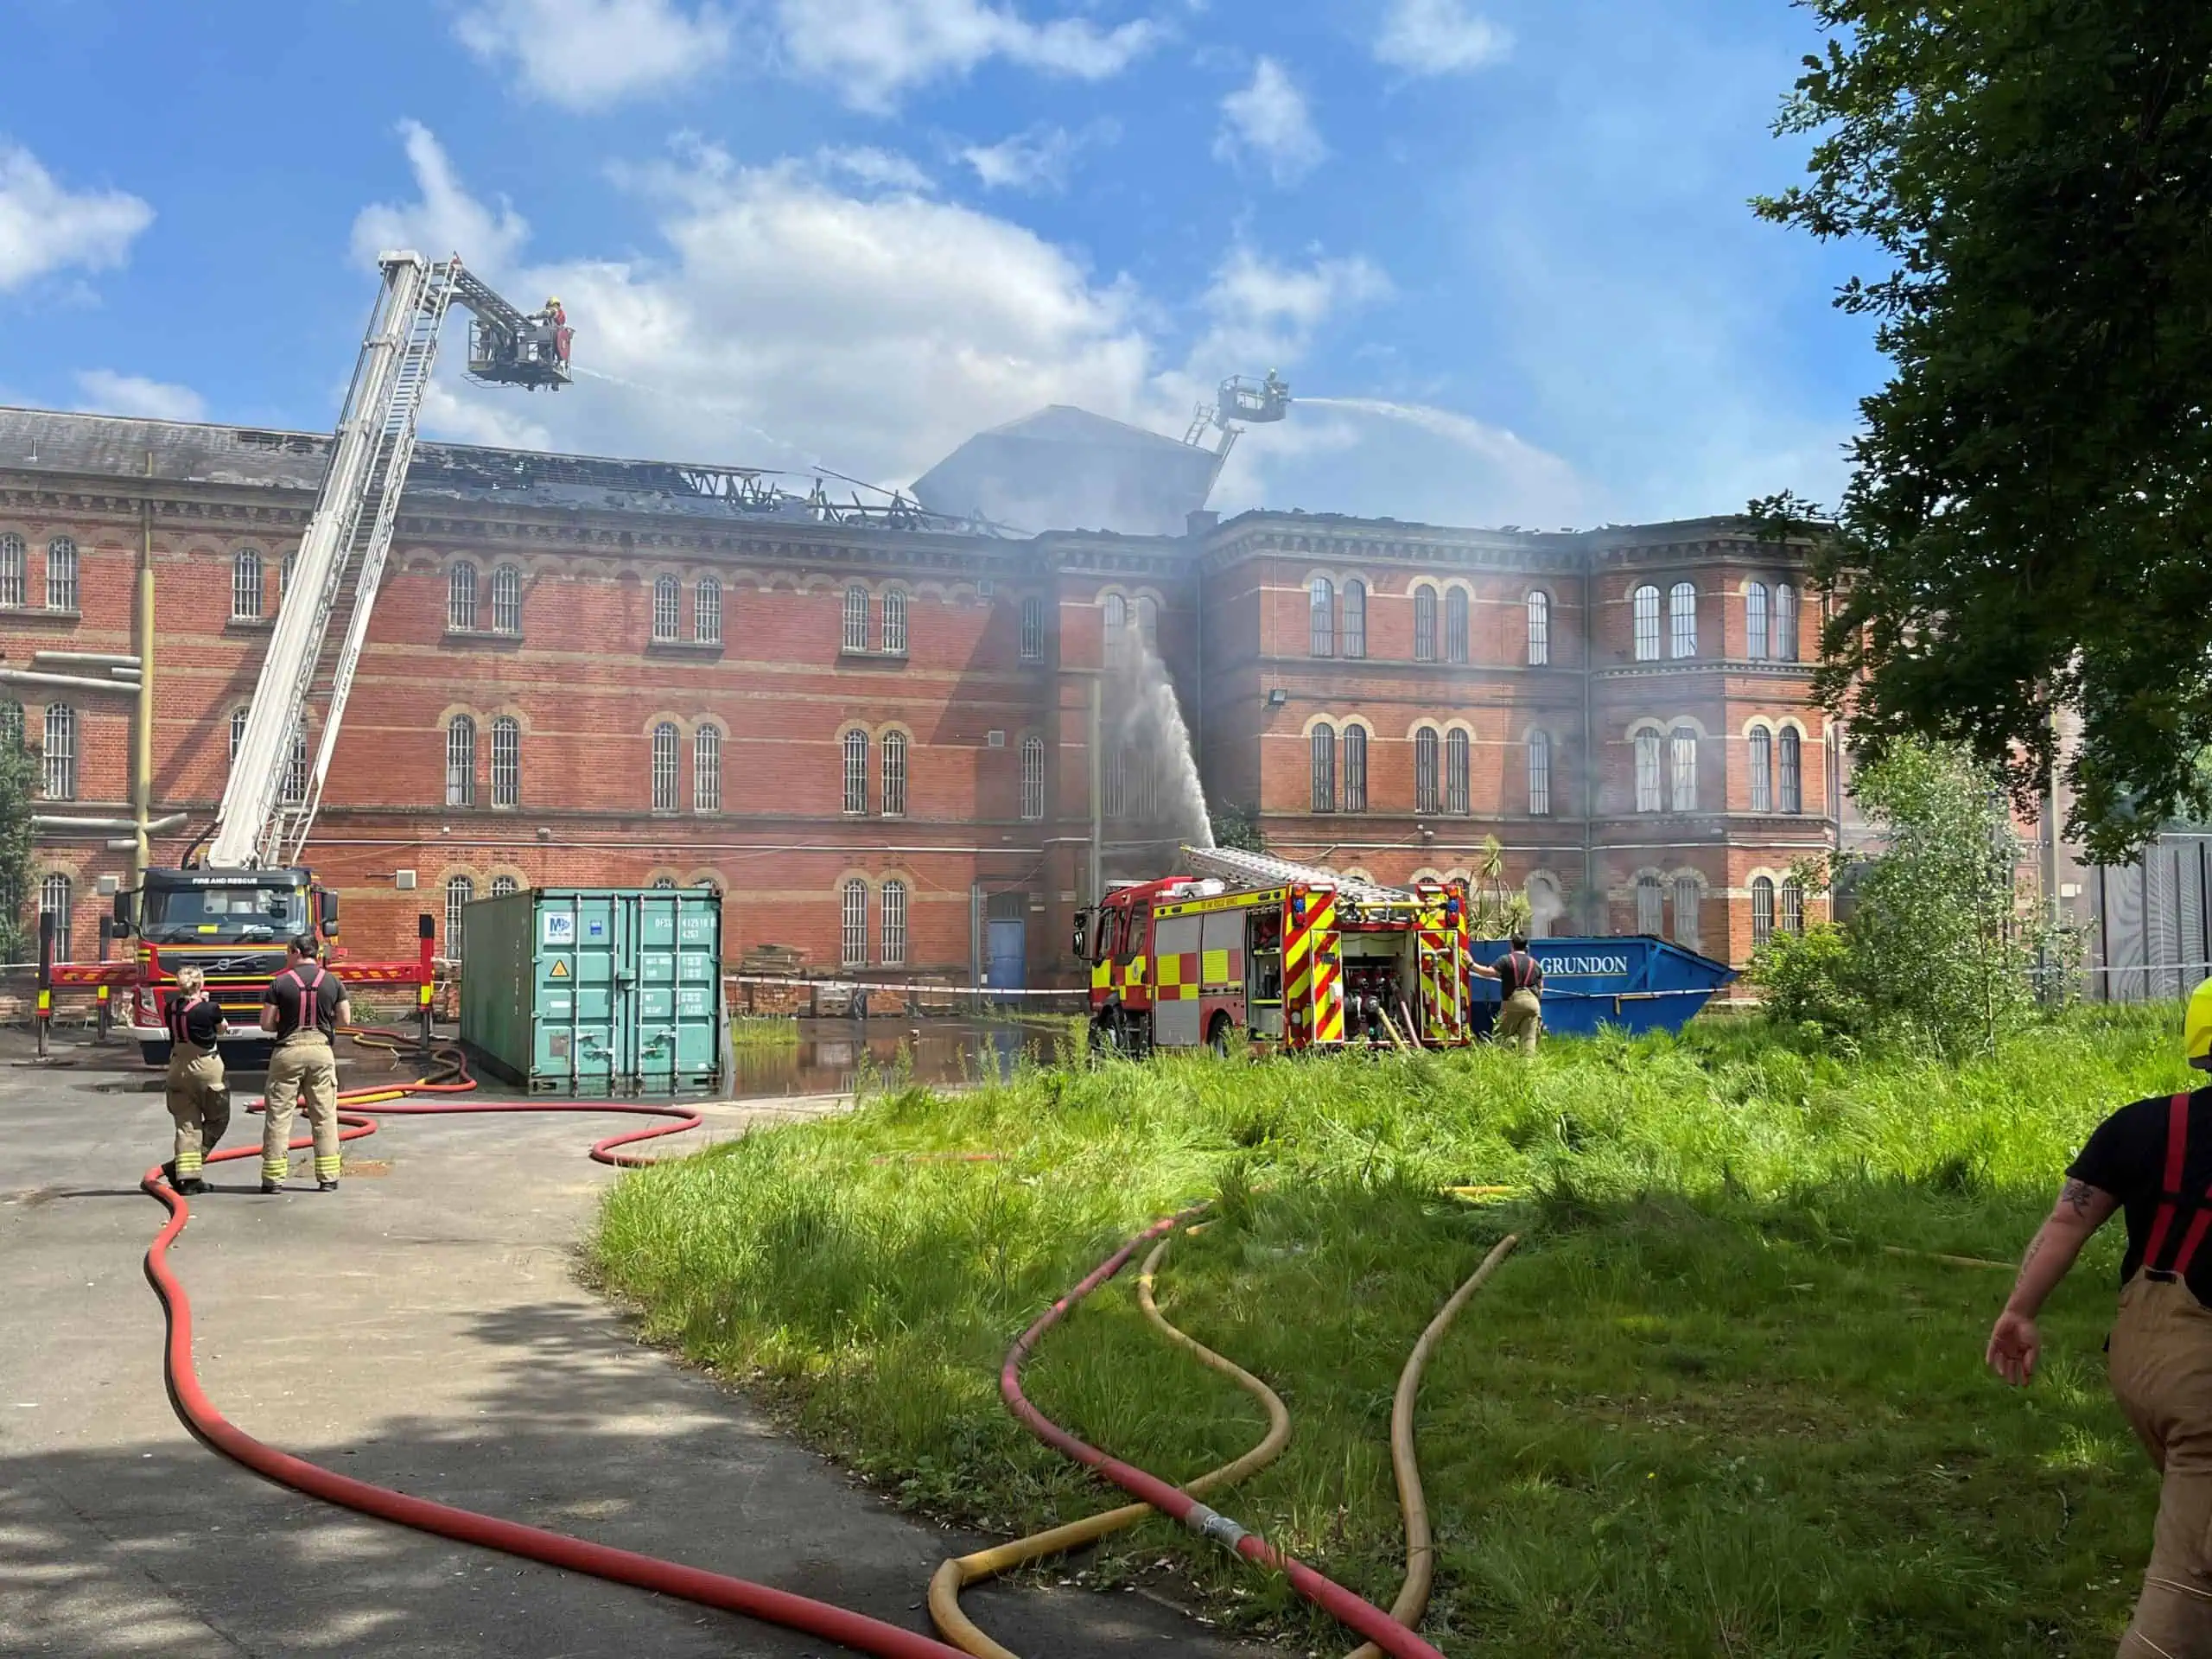 Firefighters tackle a fire at Broadmoor